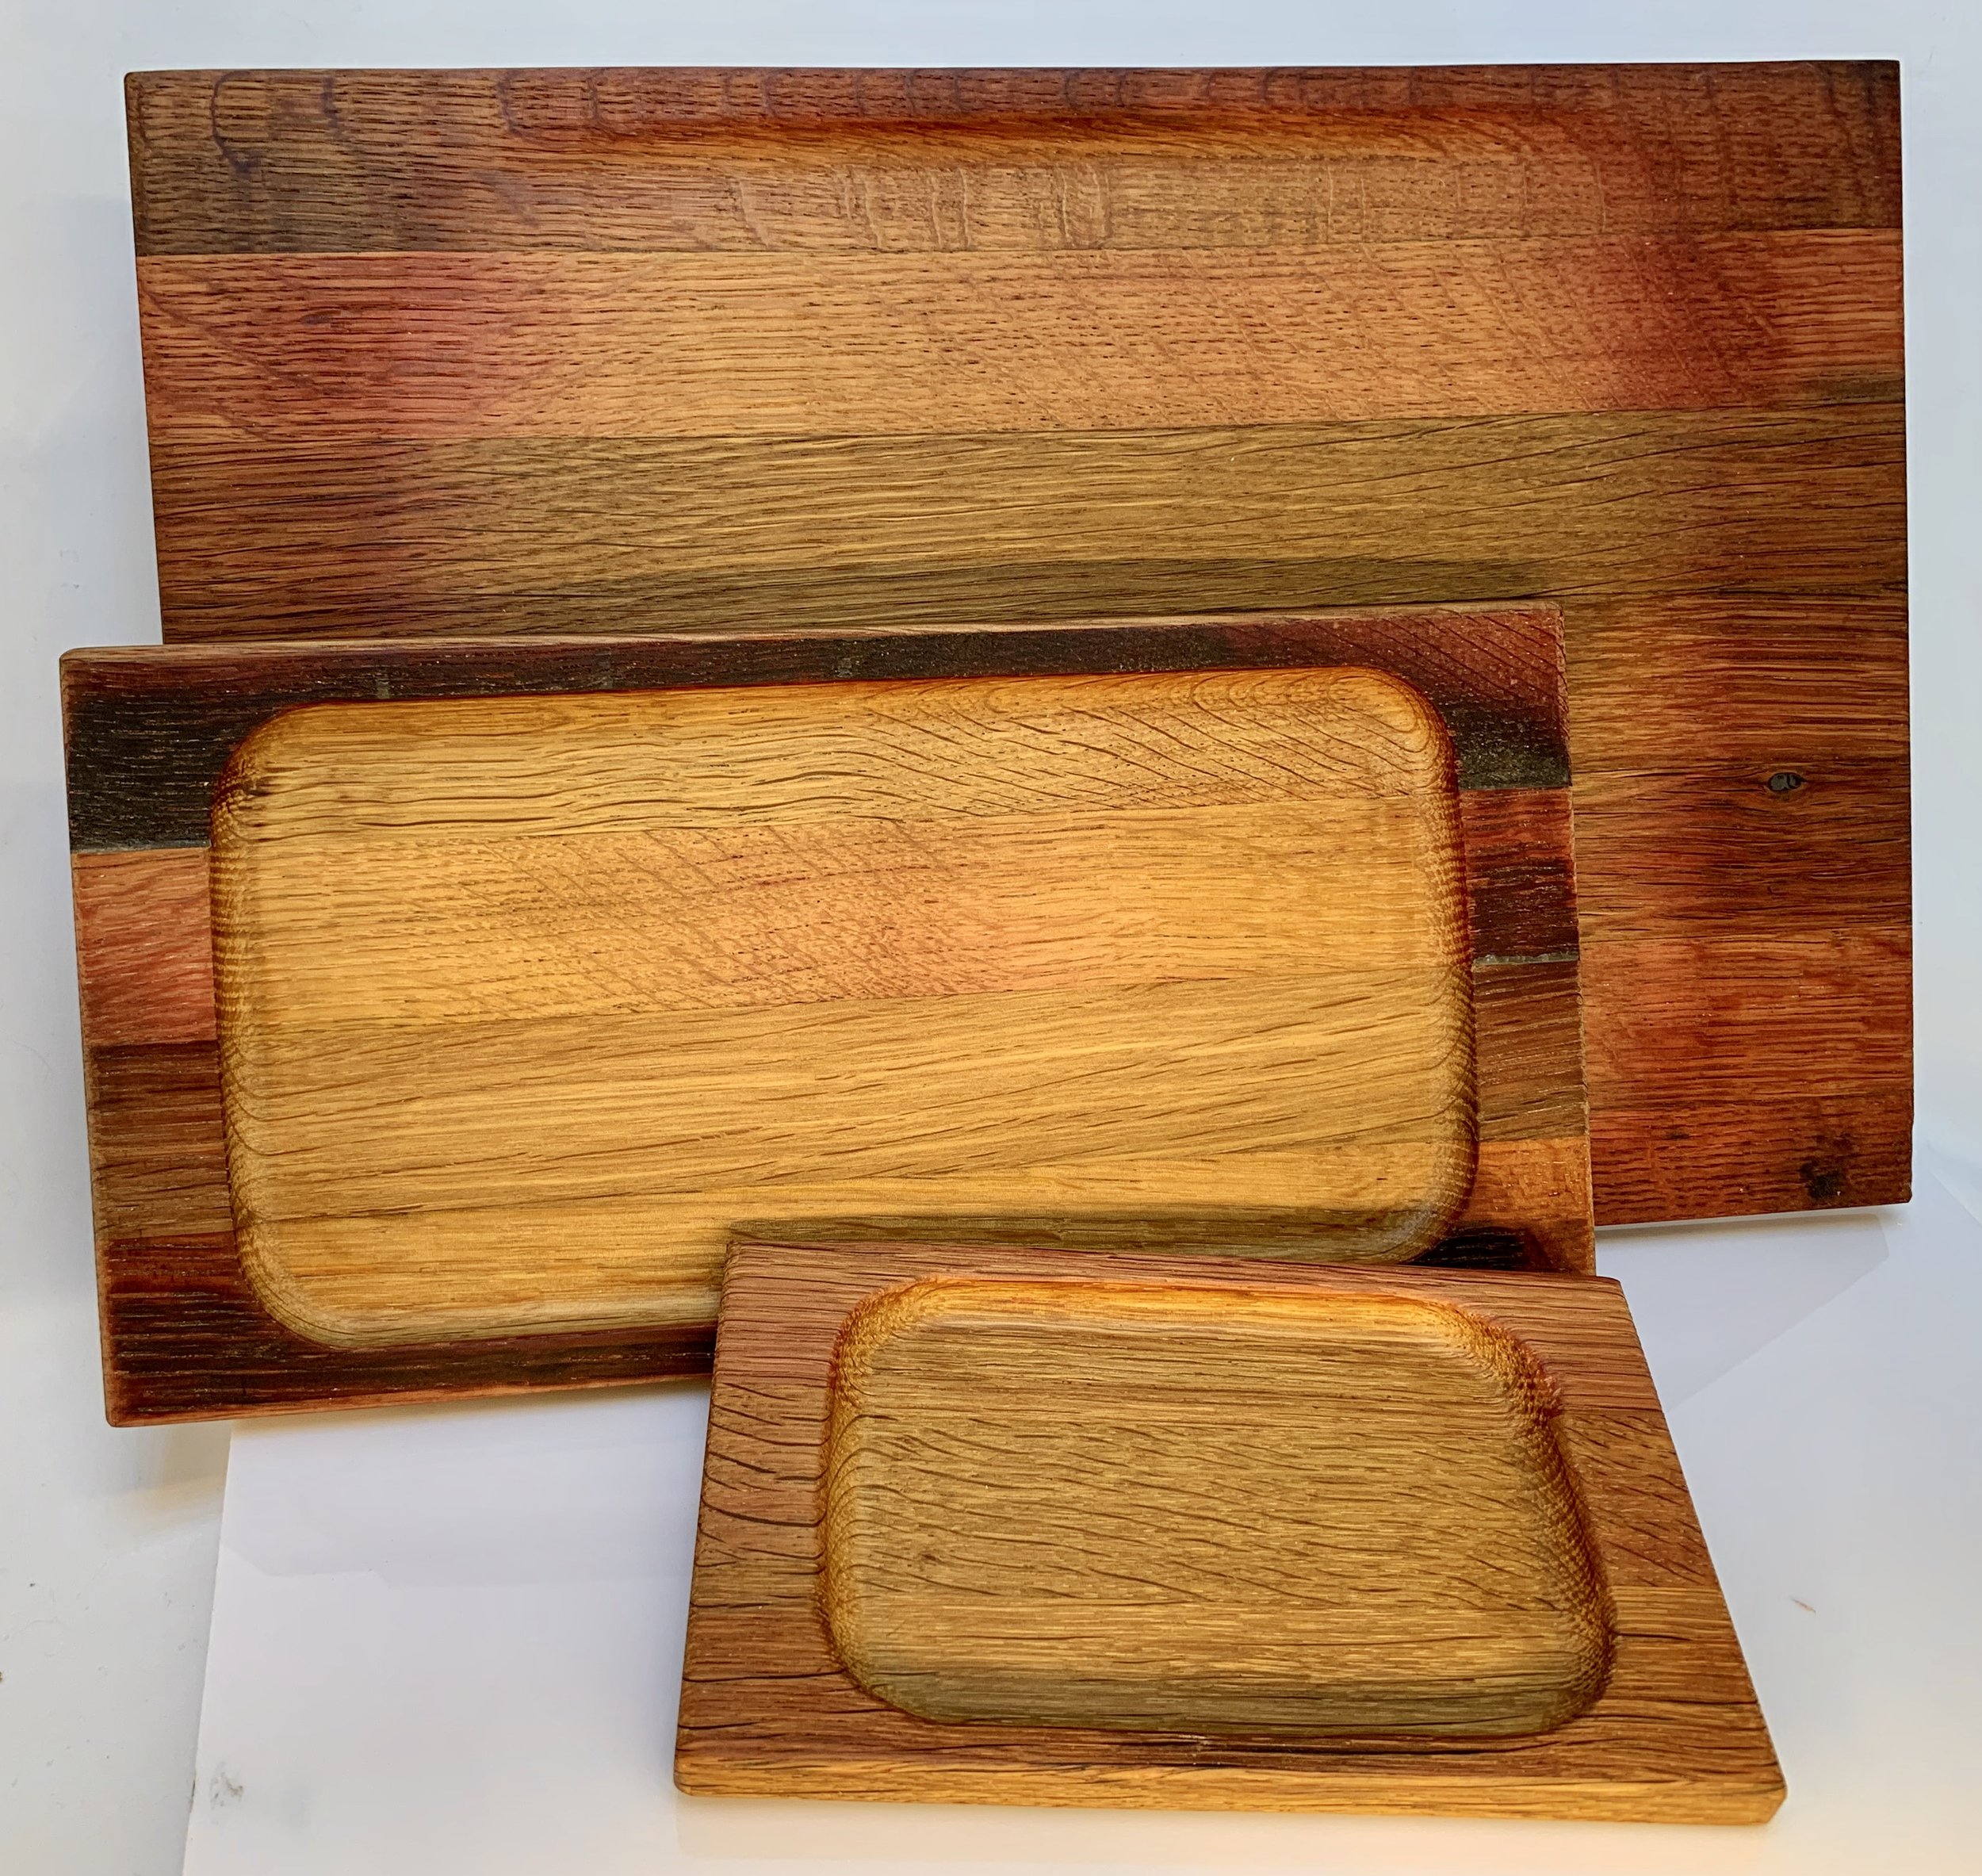  restaurant cutting board set designed and built by Tempo Designs Gabriel McKeagney 